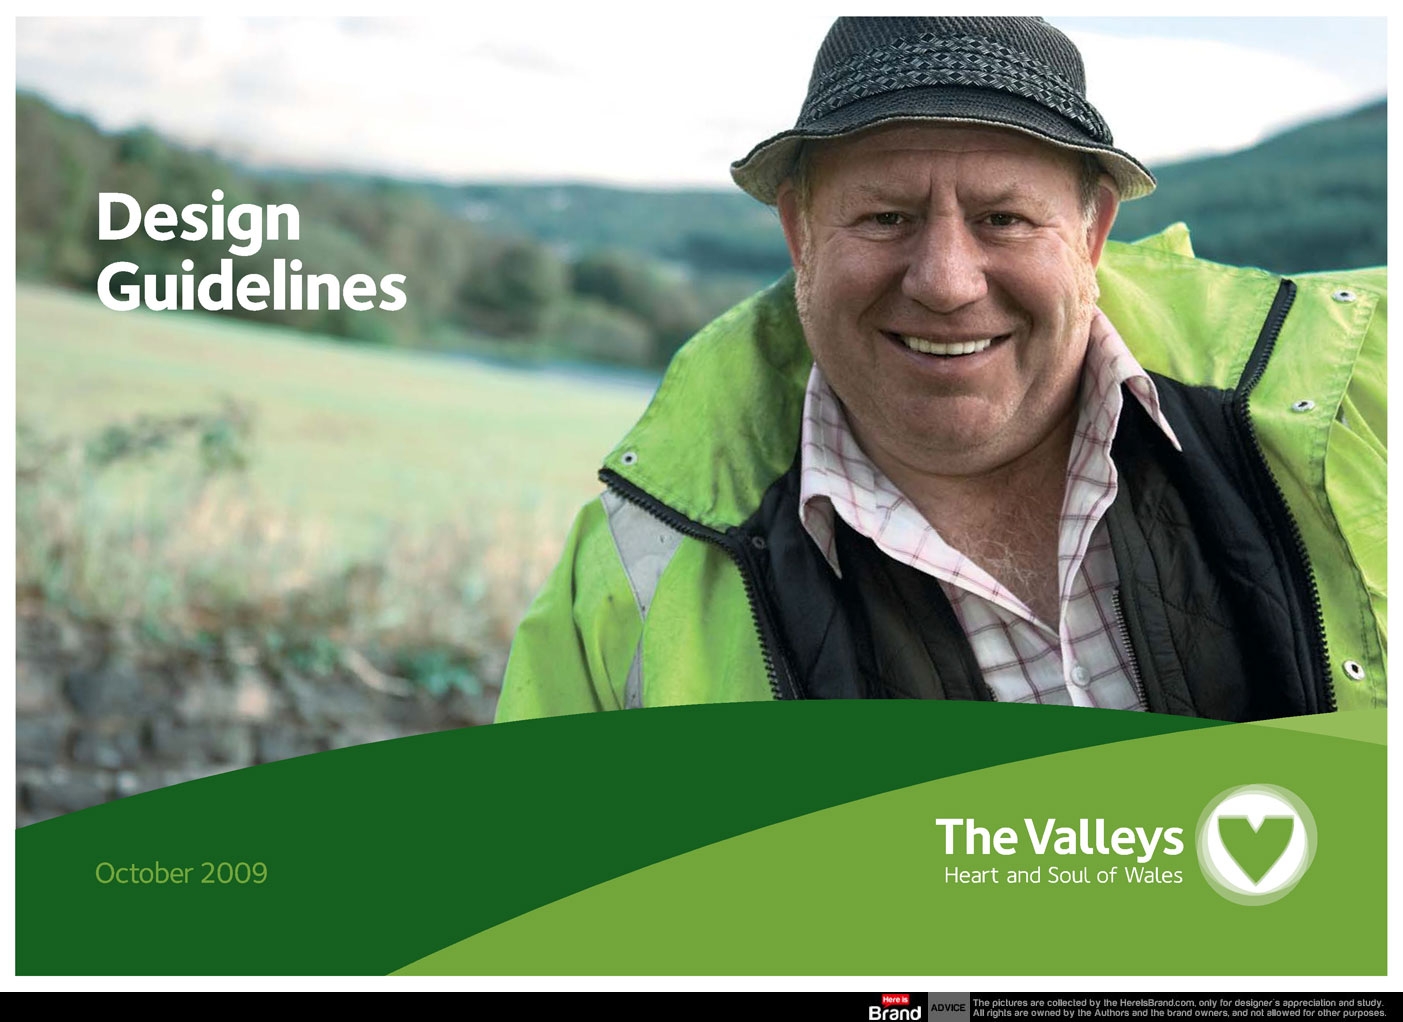 The Valleys Heart and Soul of Wales design guidelines